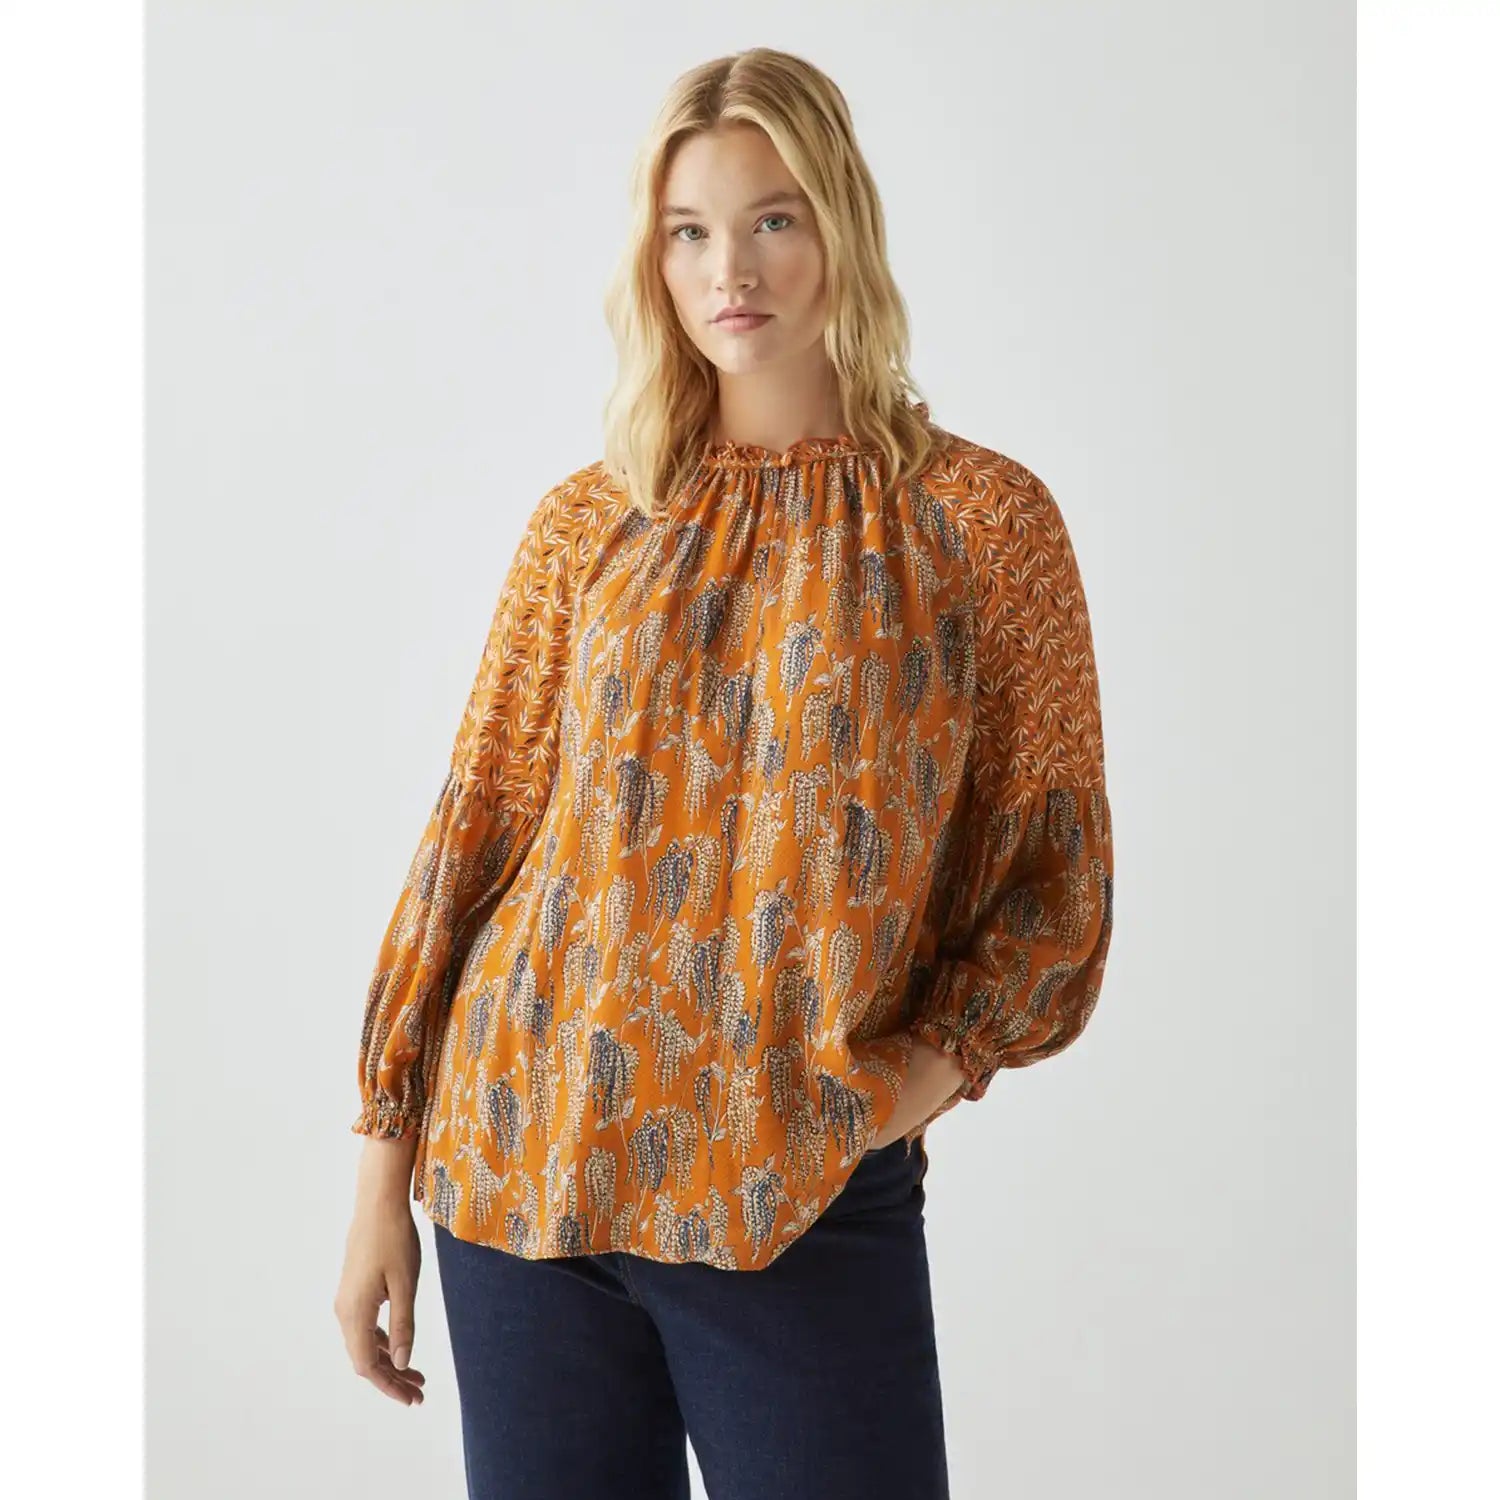 Couchel Leaves Contrast Print Blouse - Mustard 1 Shaws Department Stores